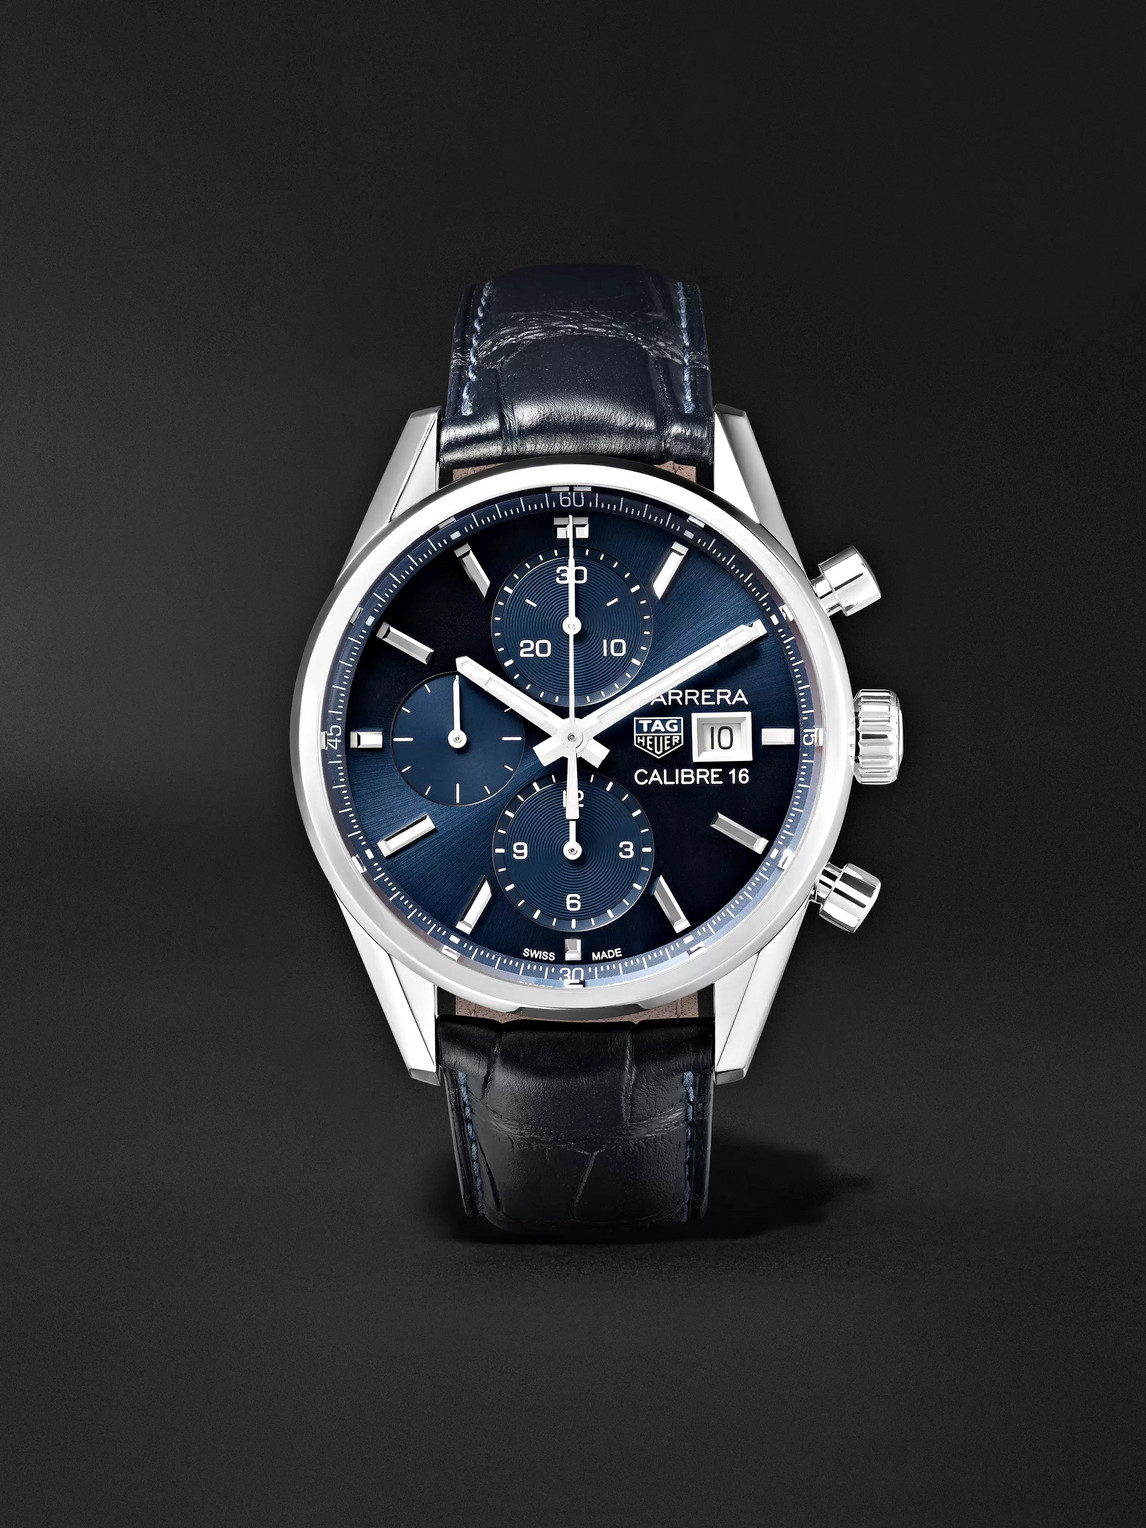 Tag Heuer Carrera Automatic Chronograph 41mm Steel And Alligator Watch, Ref. No. Cbk2112.fc6292 In Blue